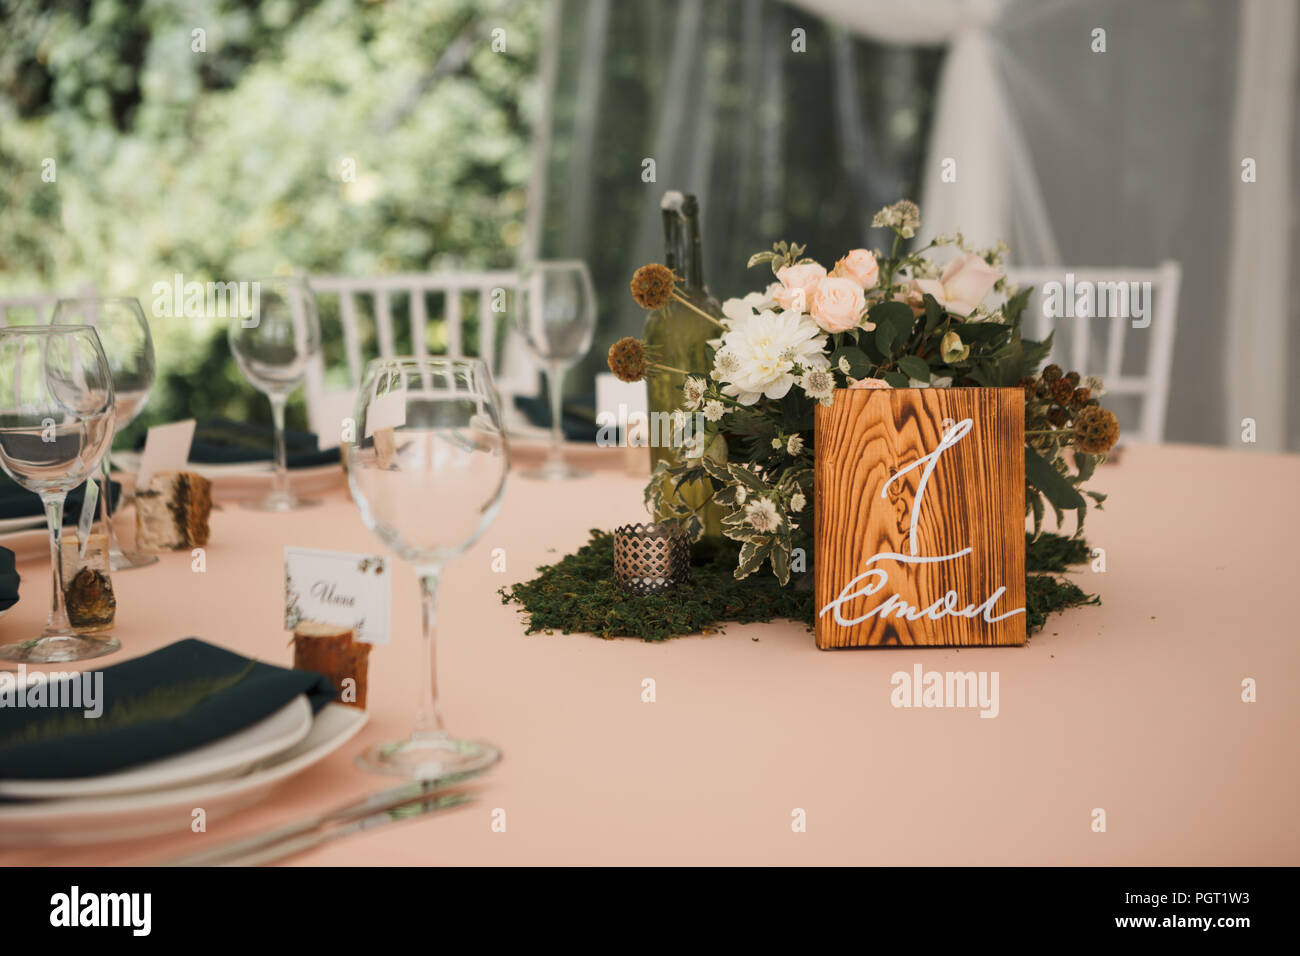 Break apart Agnes Gray Typewriter table decor for wedding ceremony, table setting, flowers, green and pink  decor, candles Stock Photo - Alamy